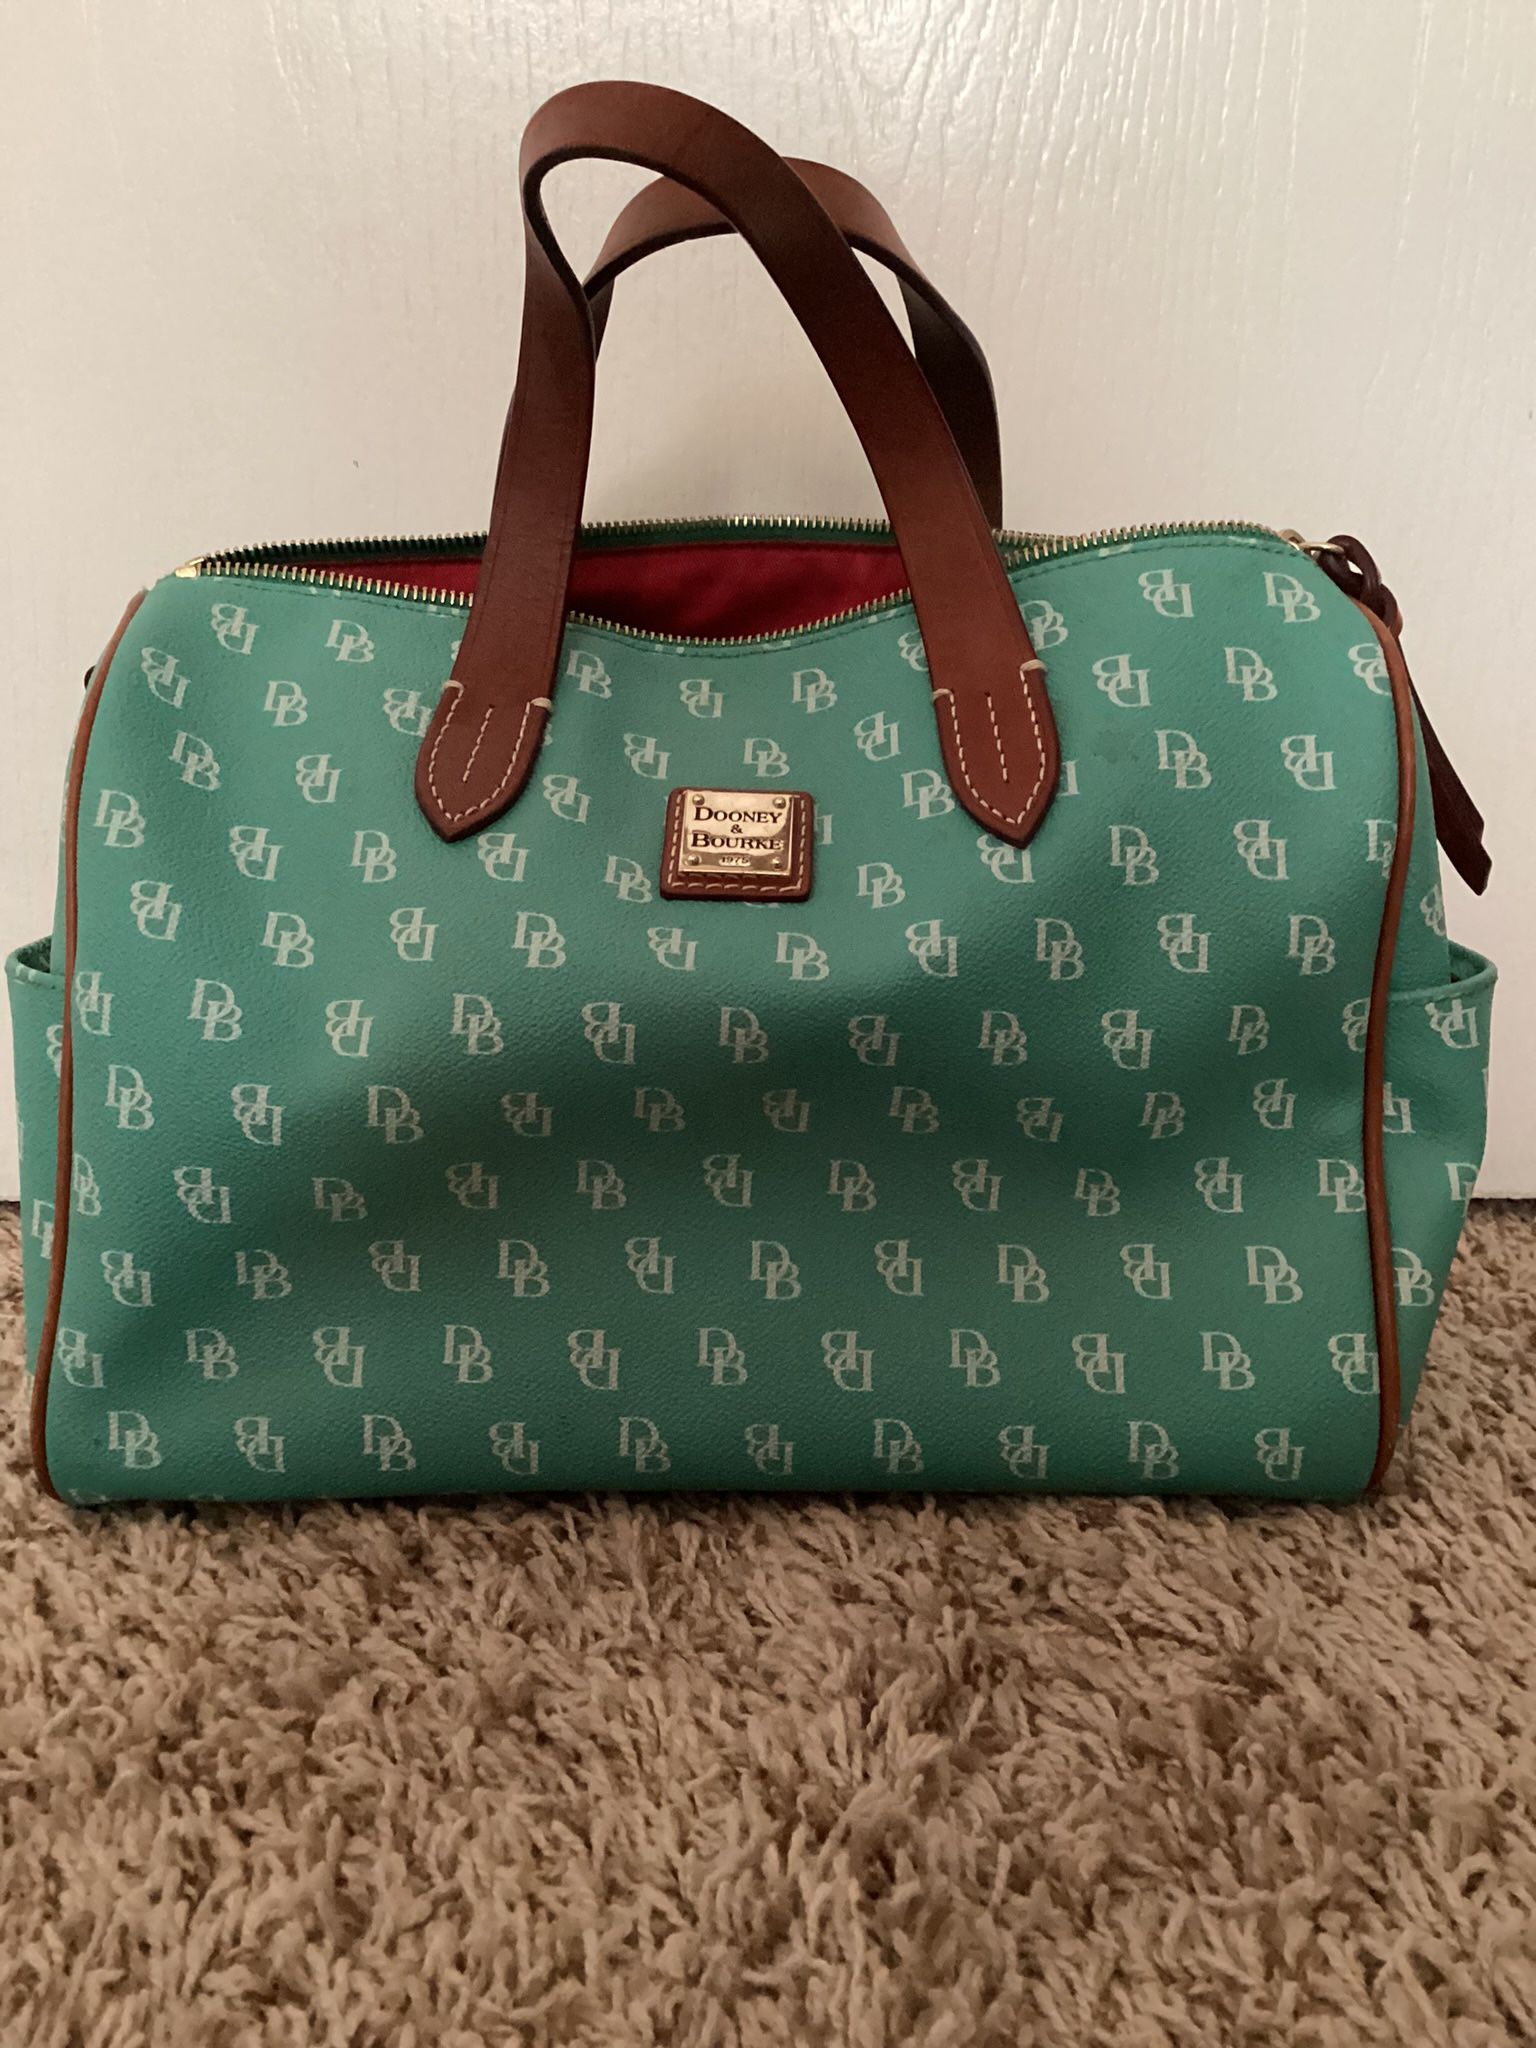 Dooney And Bourke Teal Purse